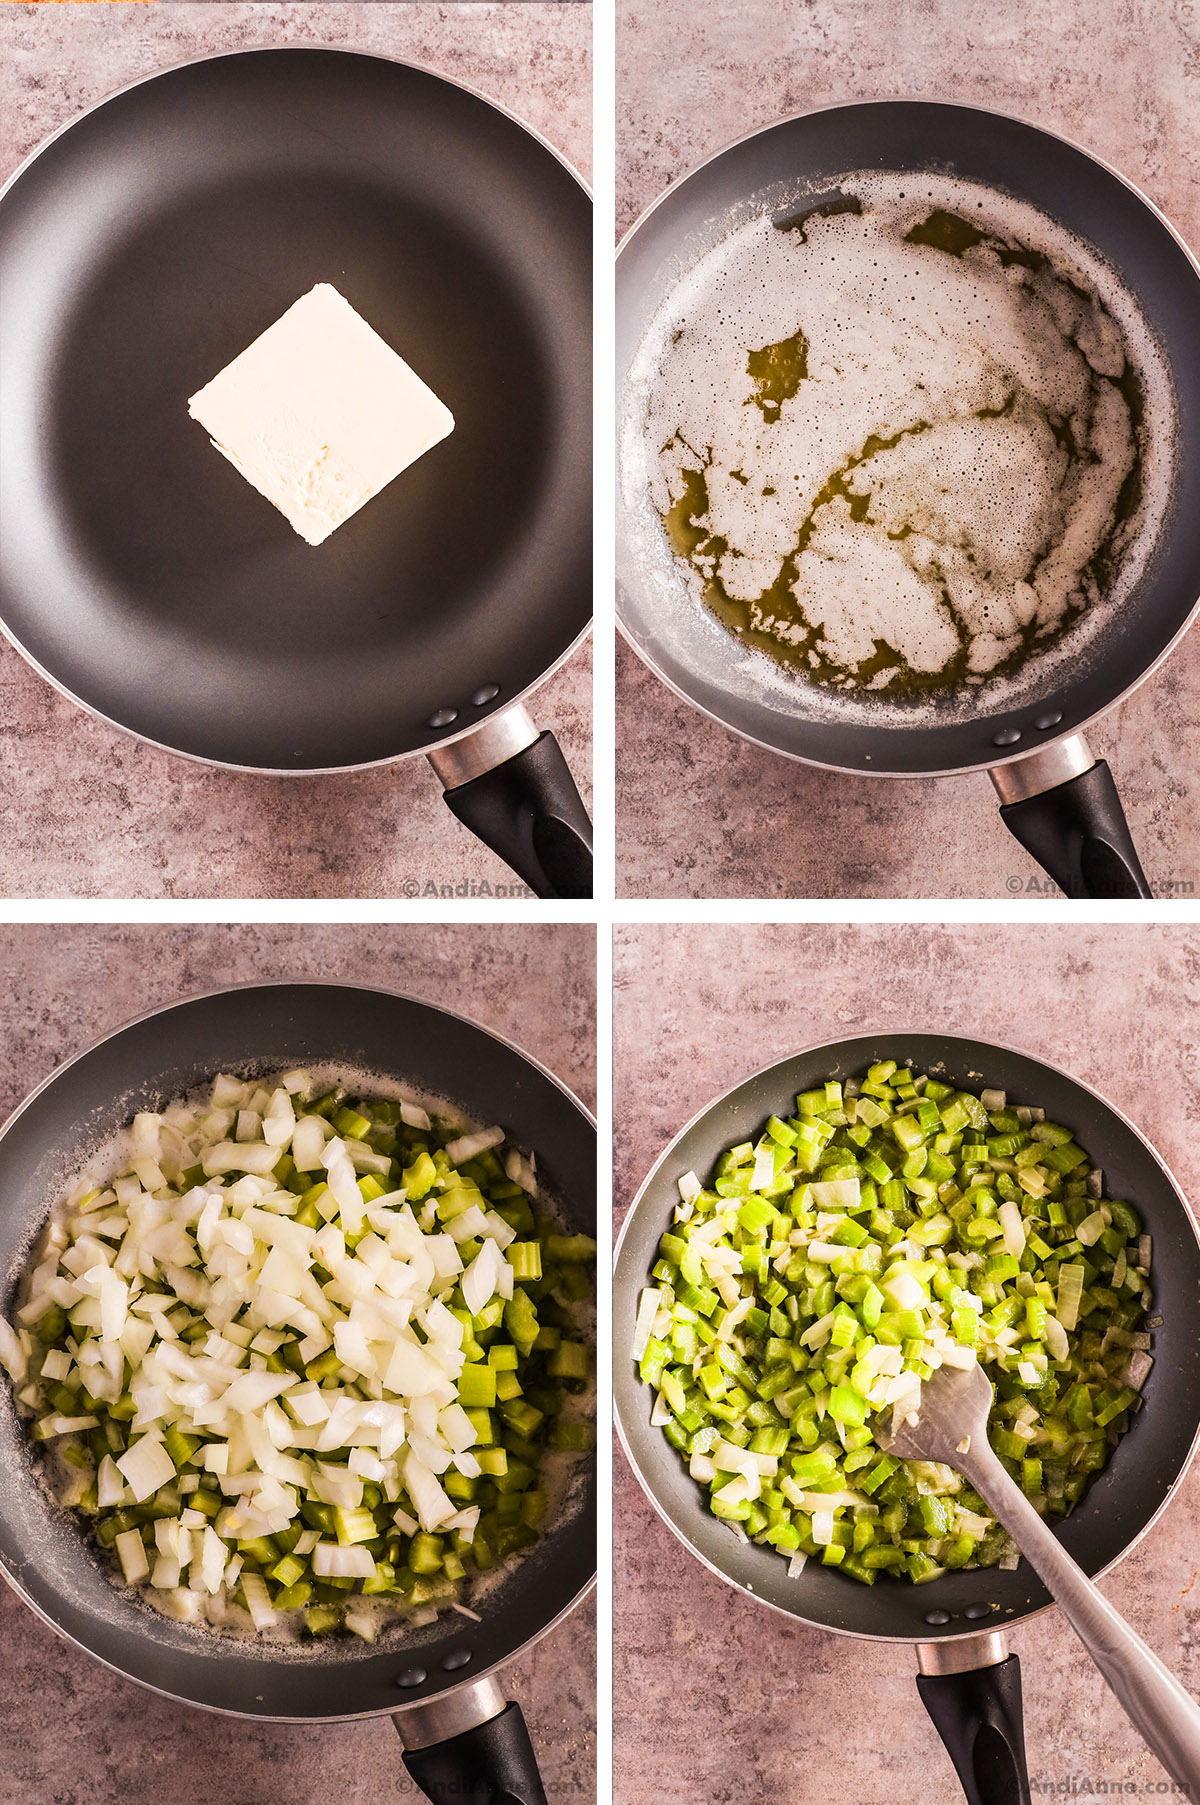 Four images of a frying pan. First two have a stick of butter, unmelted then melted. Second two with chopped onion and celery, raw then sauteed.